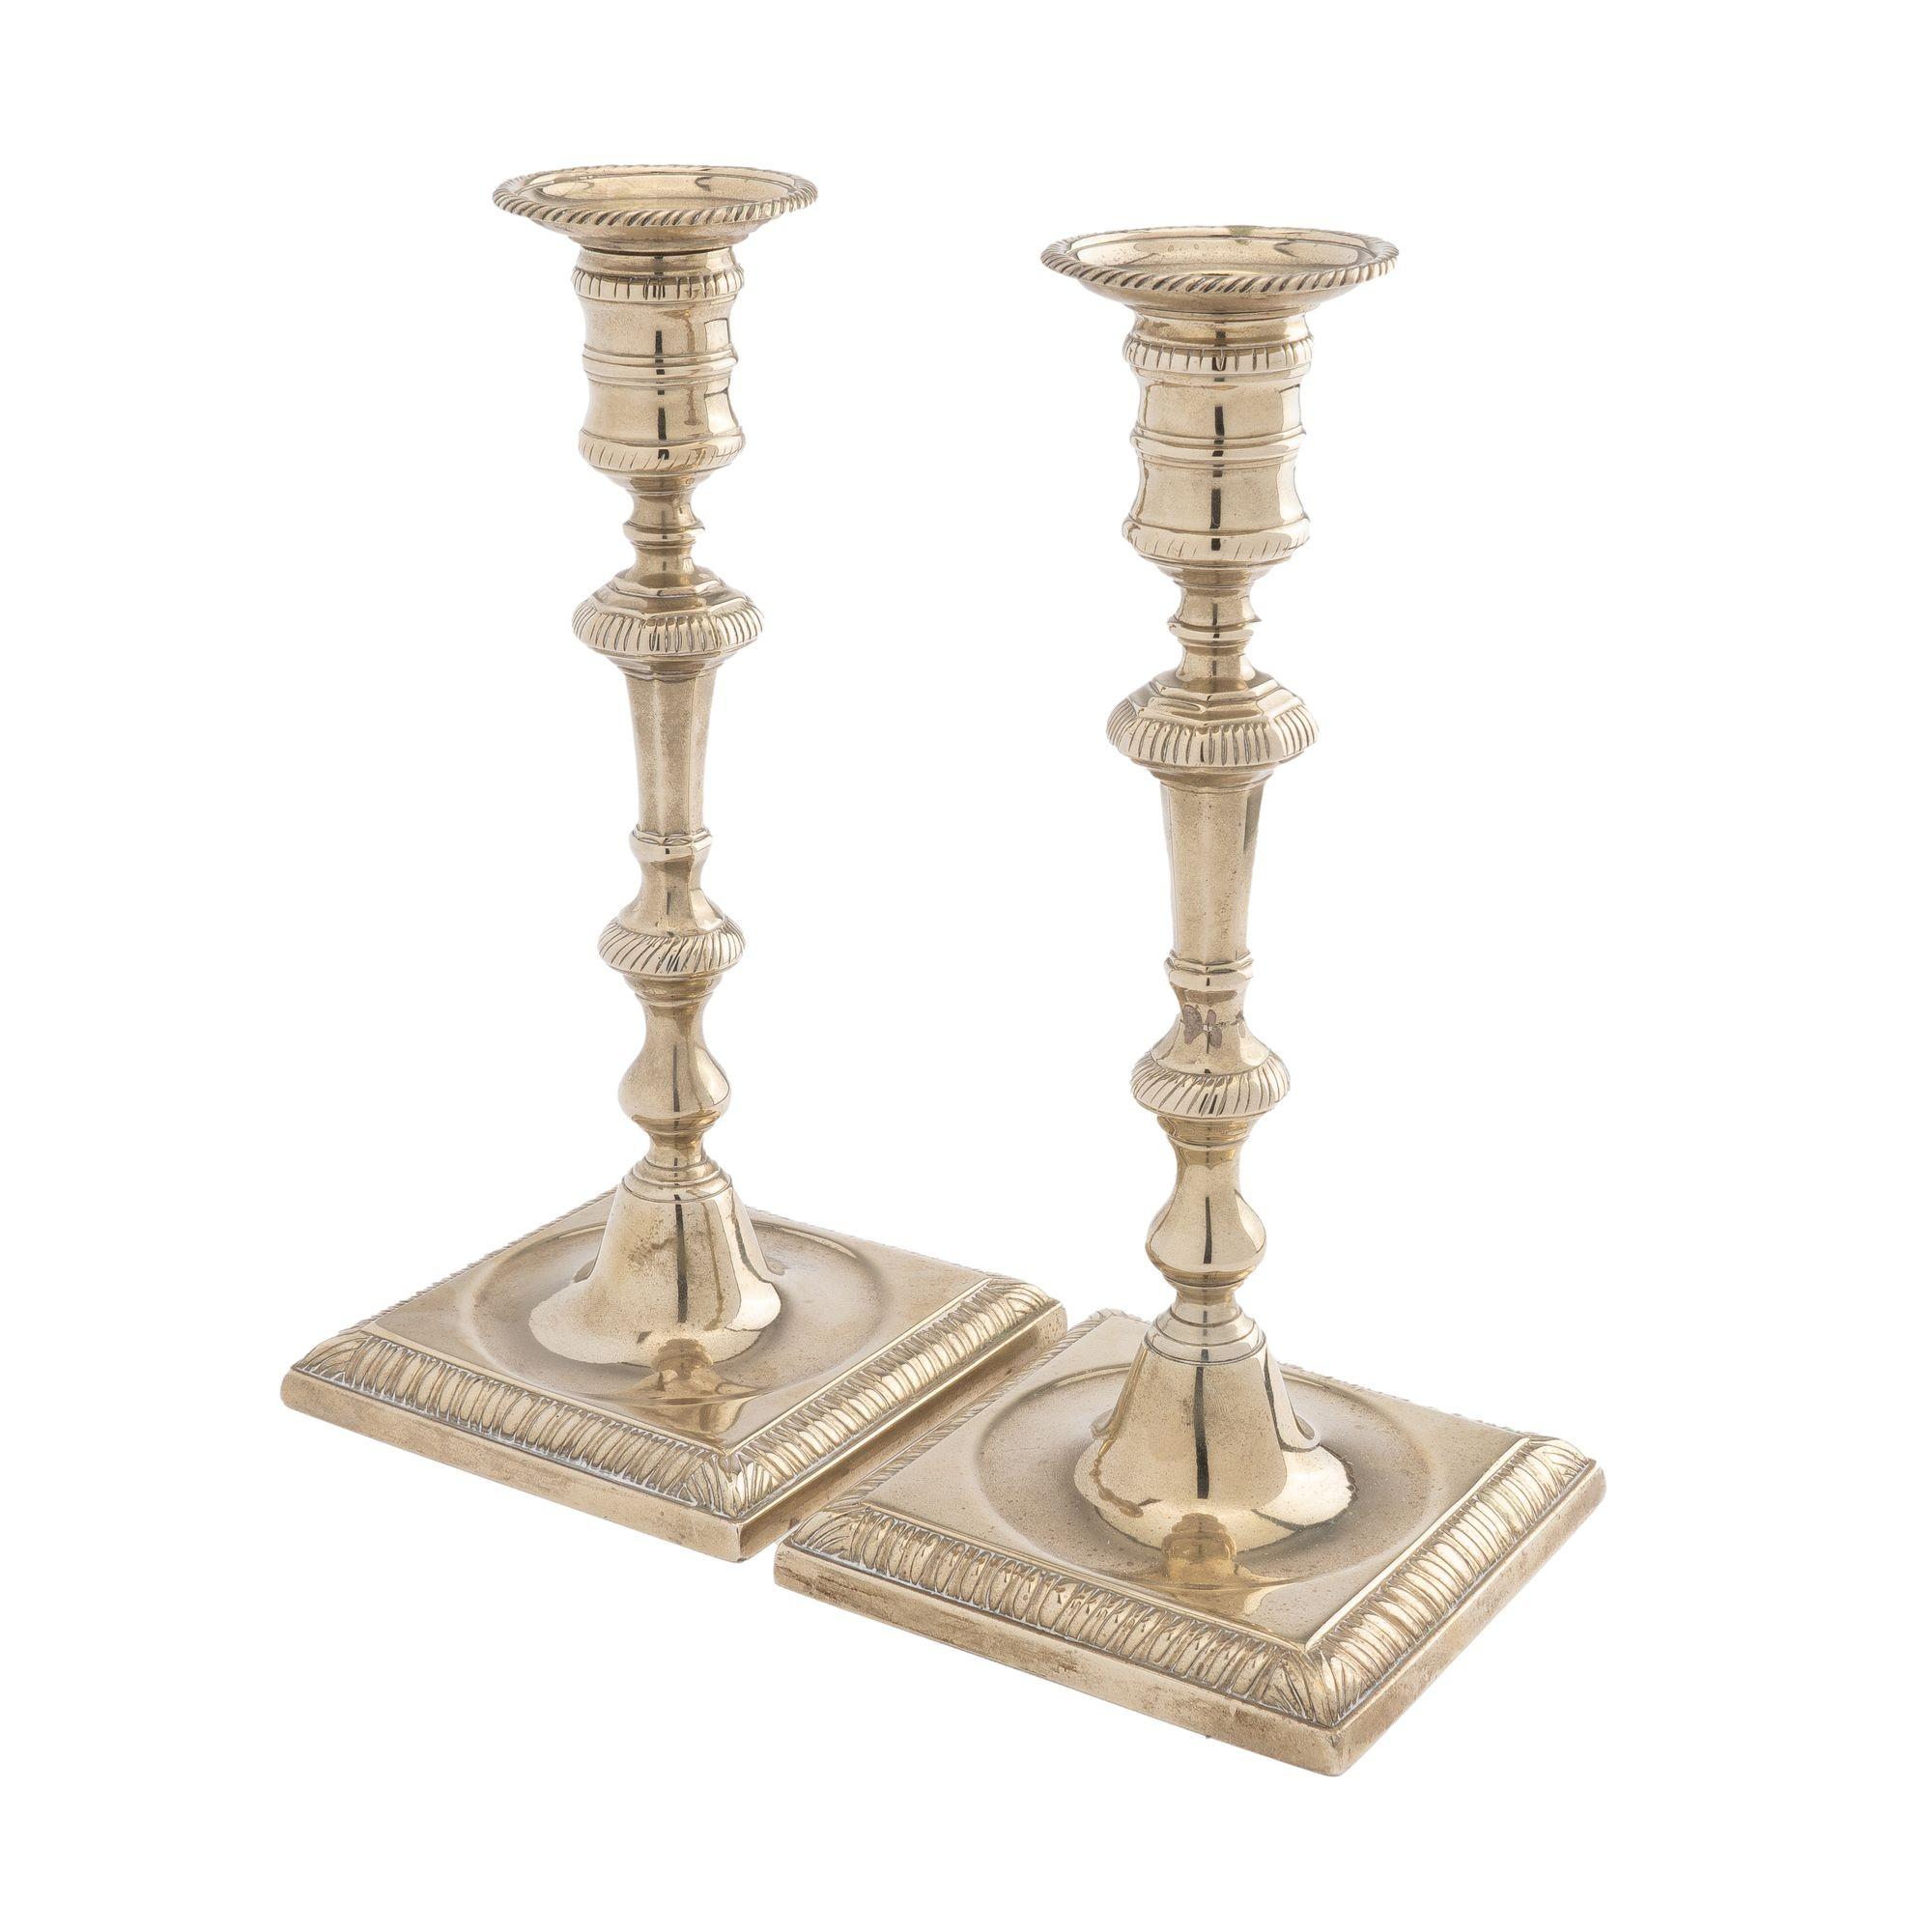 Pair of silver form George ll cast paktong candlesticks. The candle shaft rests on square base and fitted with a gadroon edged circular bobesh.
Birmingham, England, circa 1750-60.